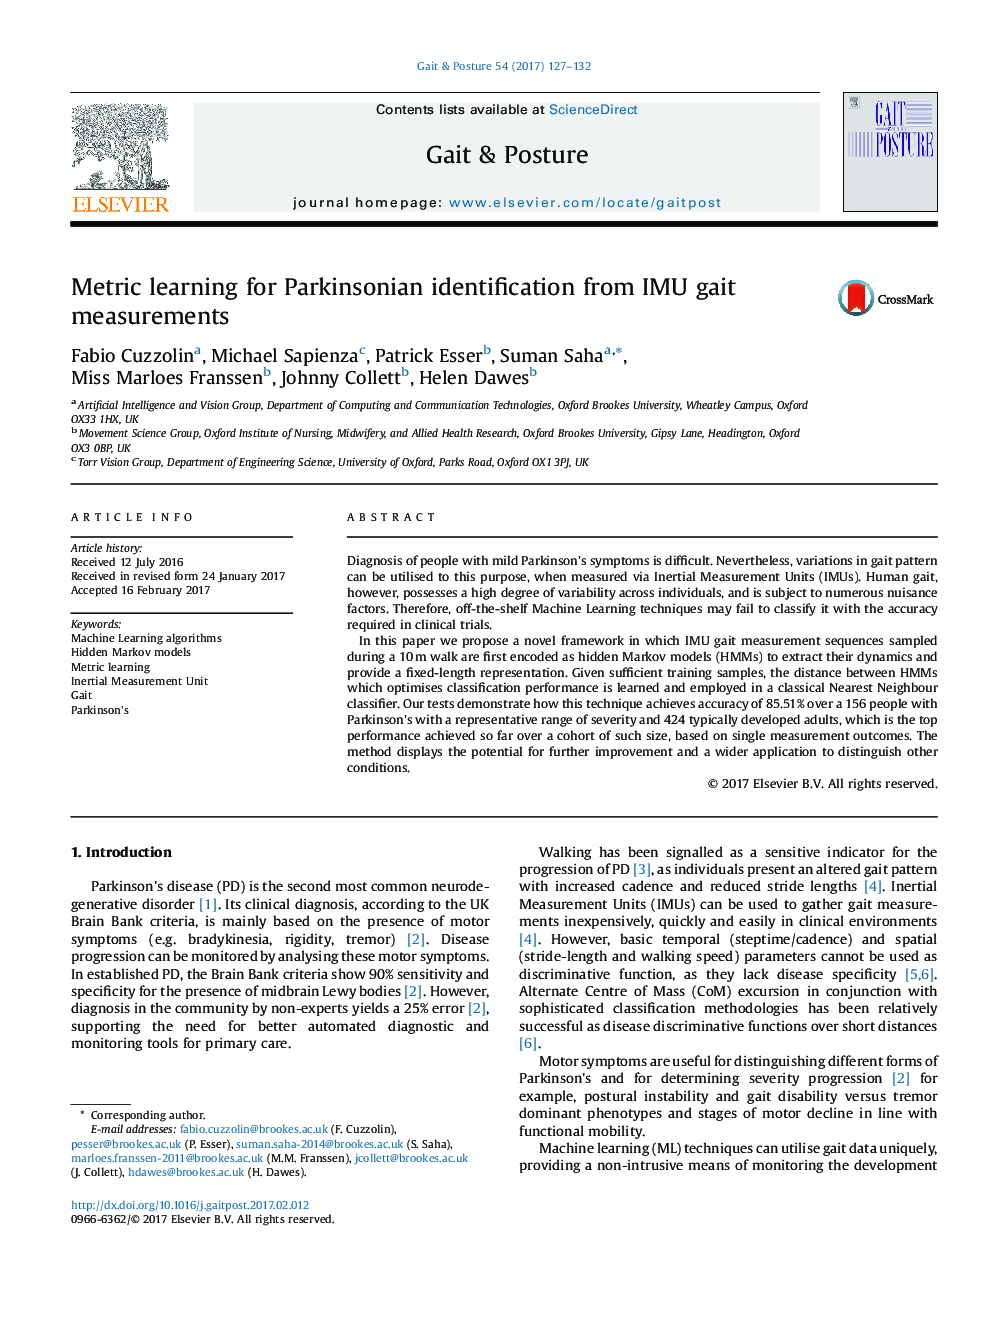 Metric learning for Parkinsonian identification from IMU gait measurements